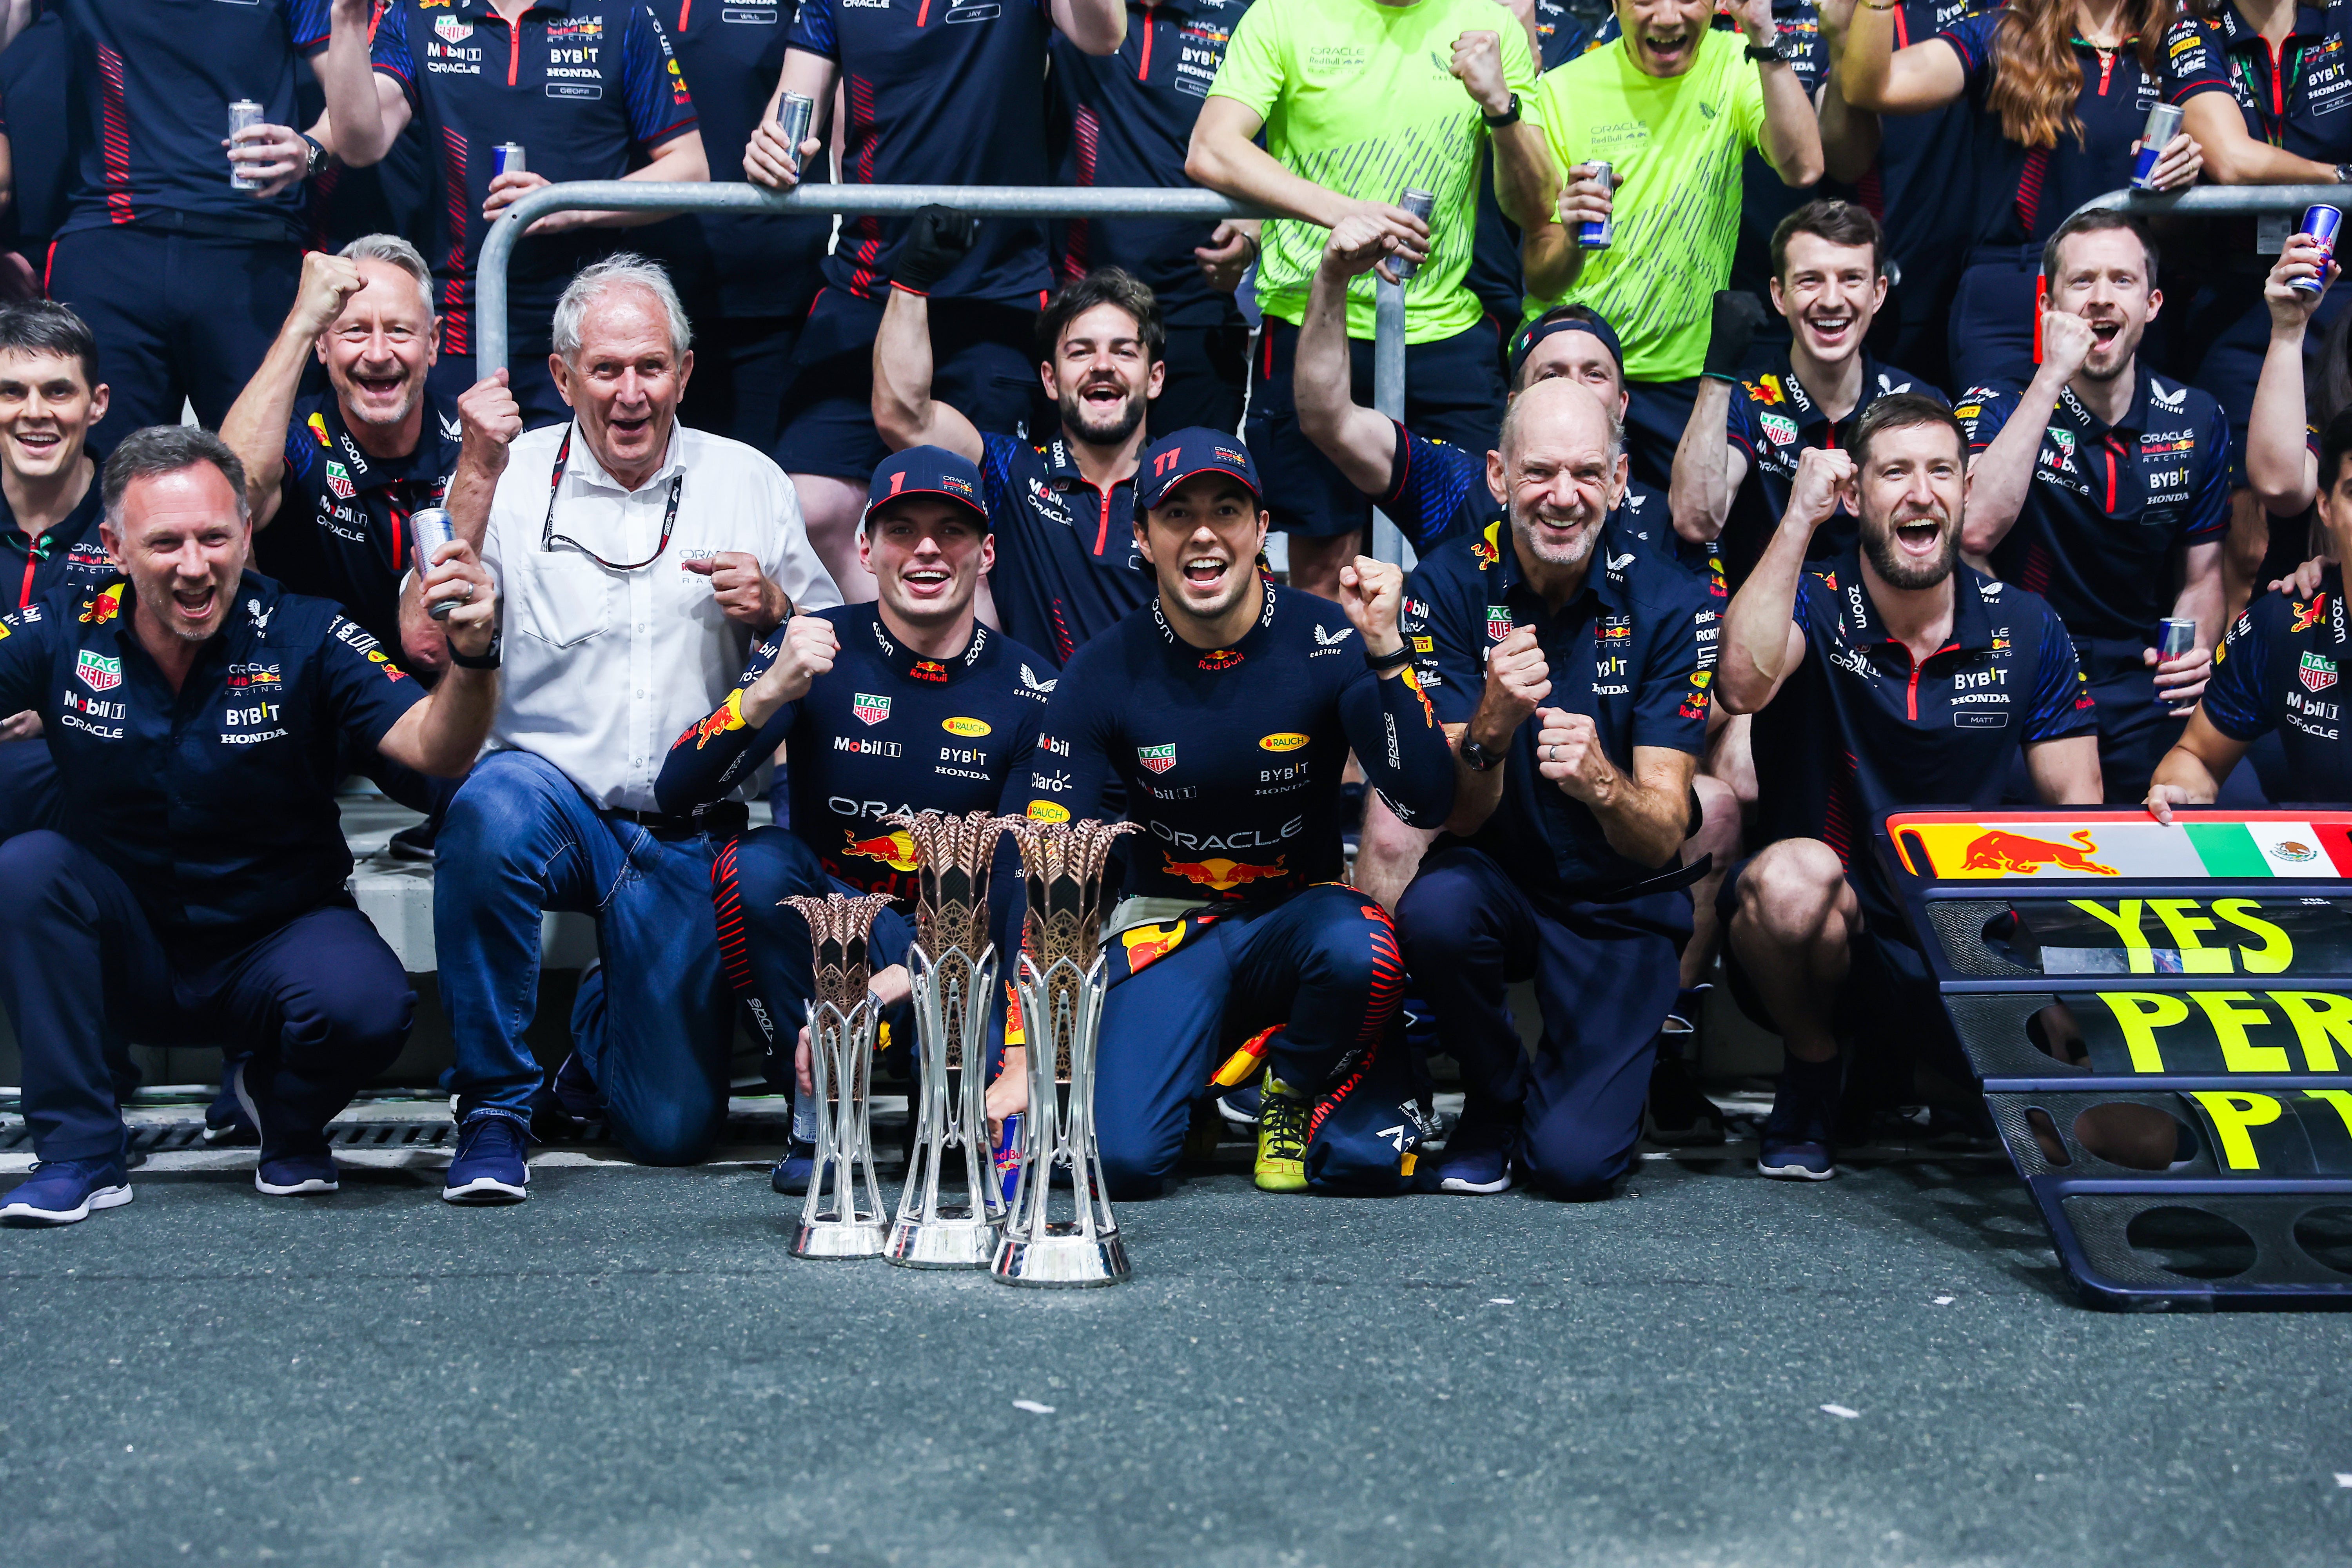 There is one other possible point of contention at Red Bull: between the drivers themselves